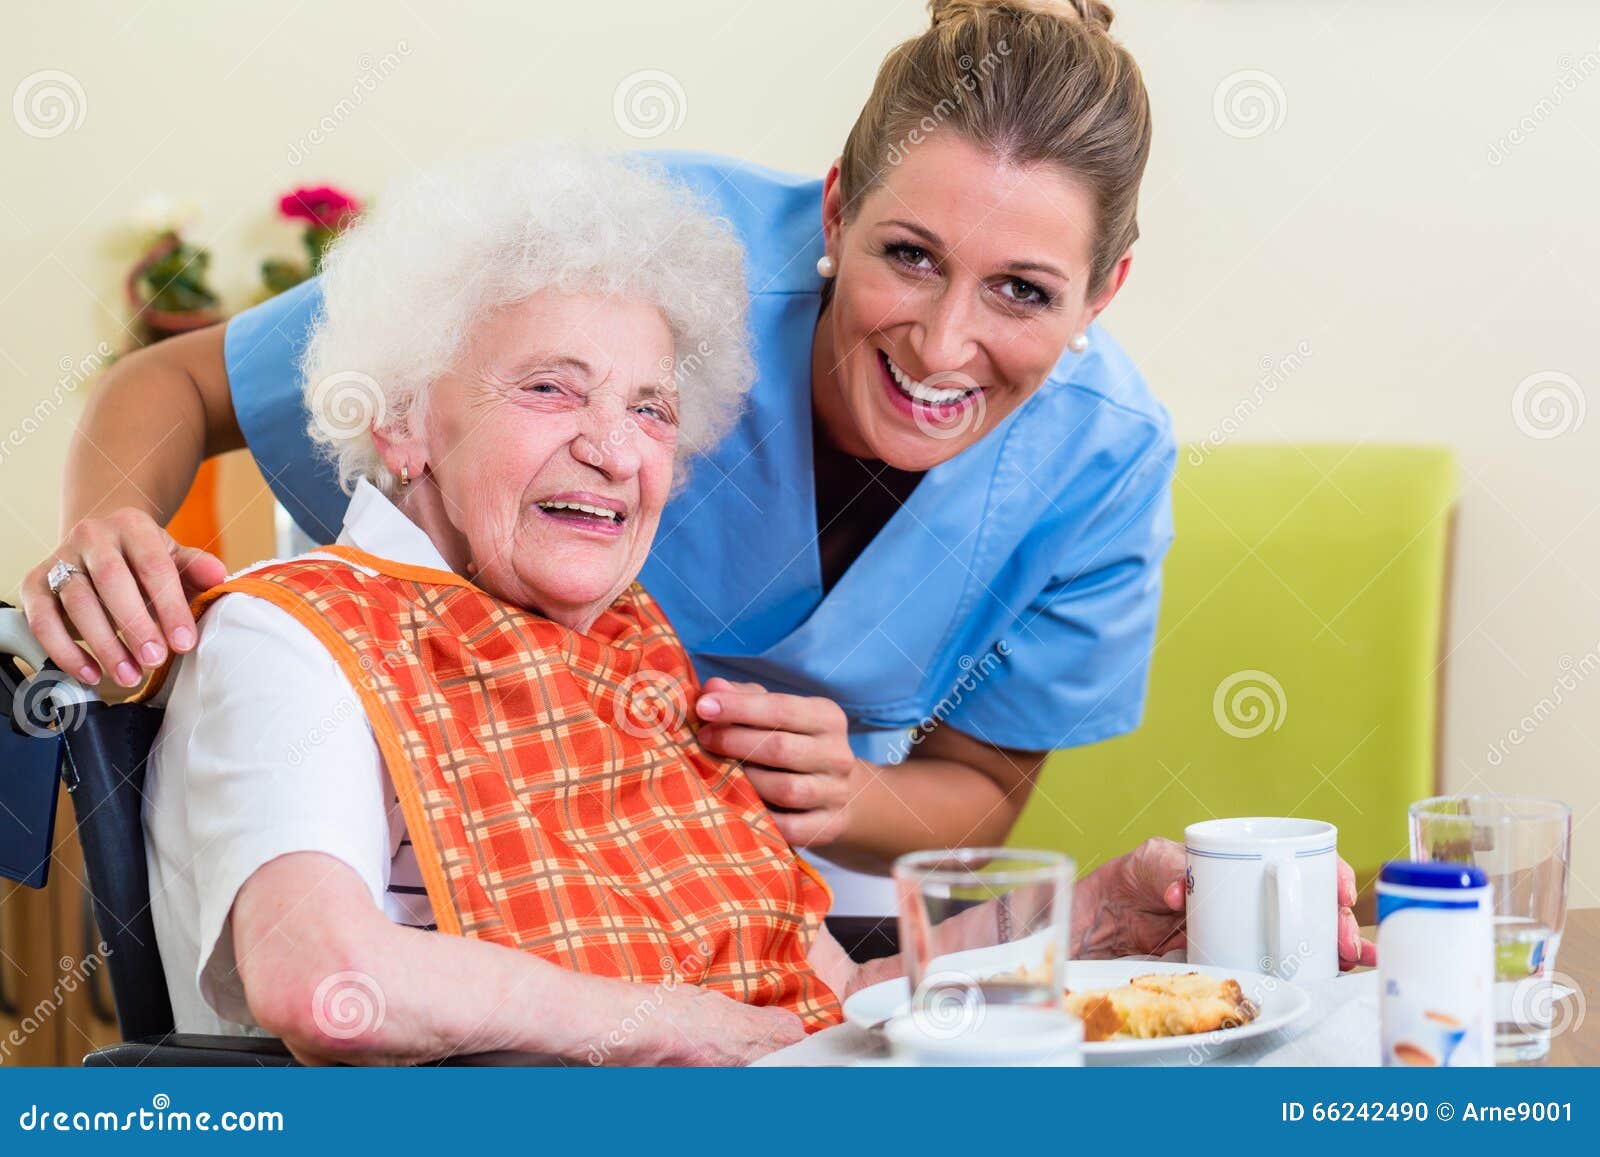 nurse with senior woman helping with meal